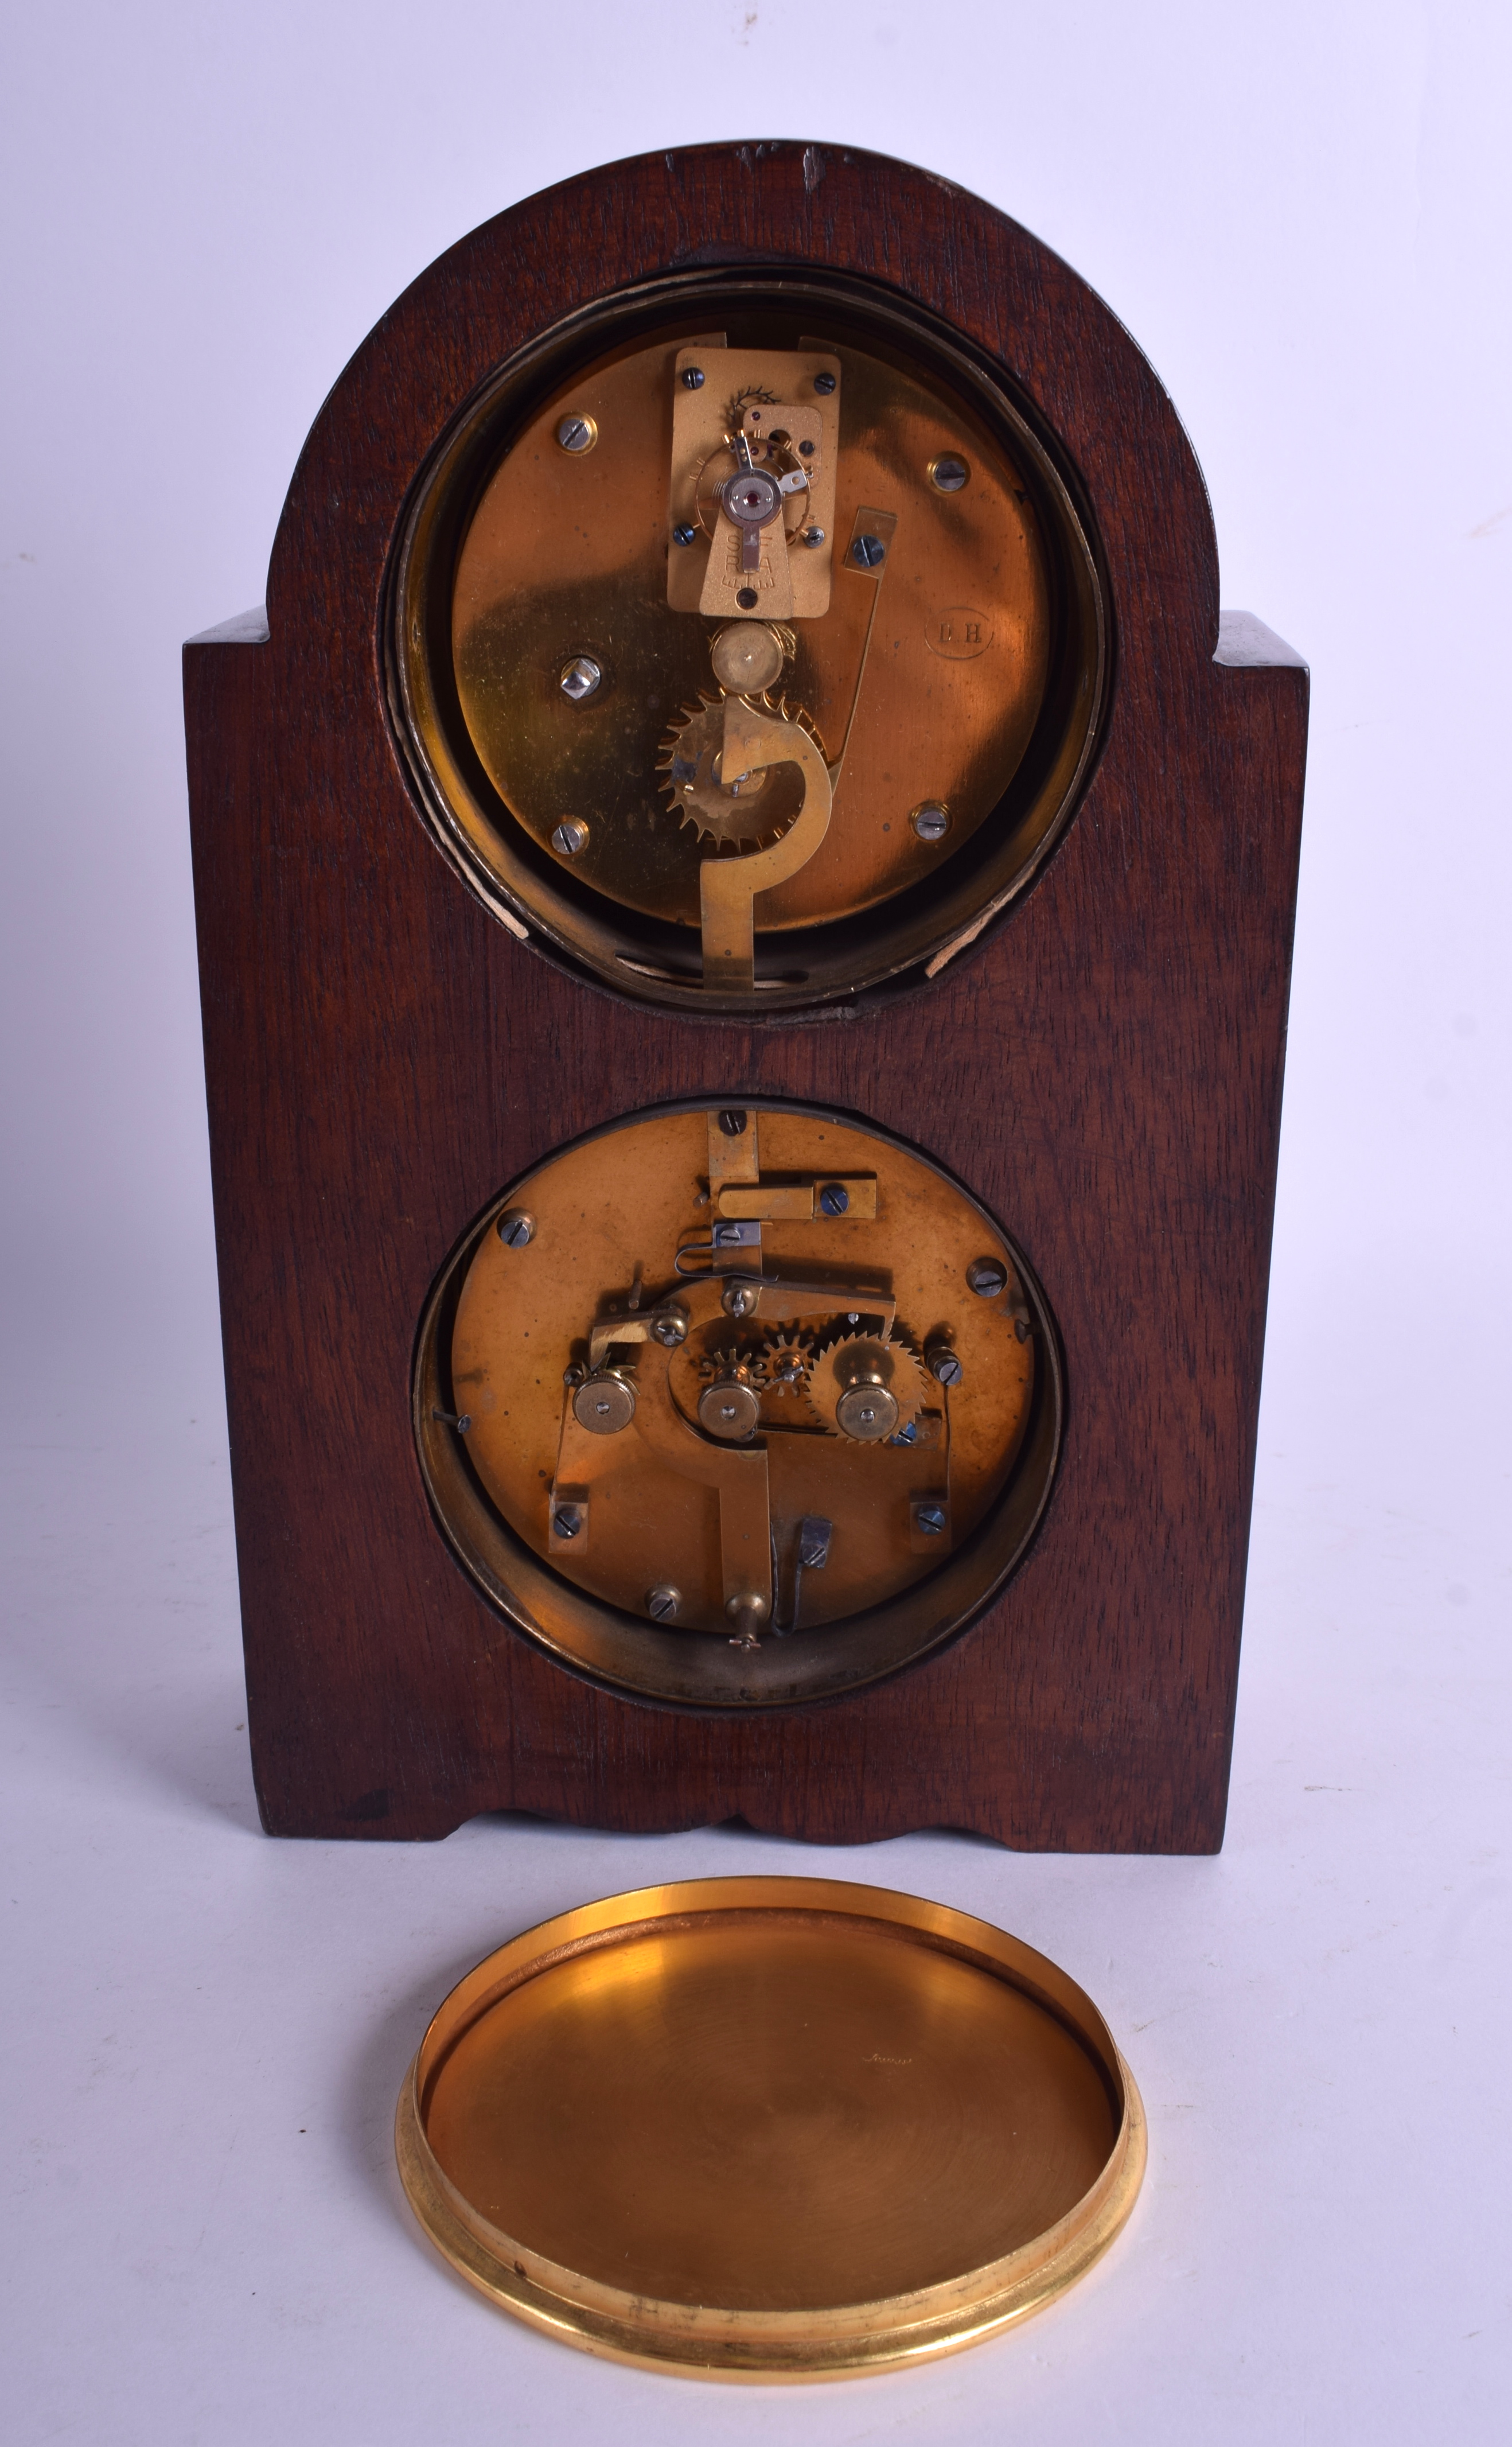 AN ENGLISH MAHOGANY CLOCK CALENDAR TIME PIECE MANTEL CLOCK with two dials. 25 cm x 14 cm. - Image 2 of 2